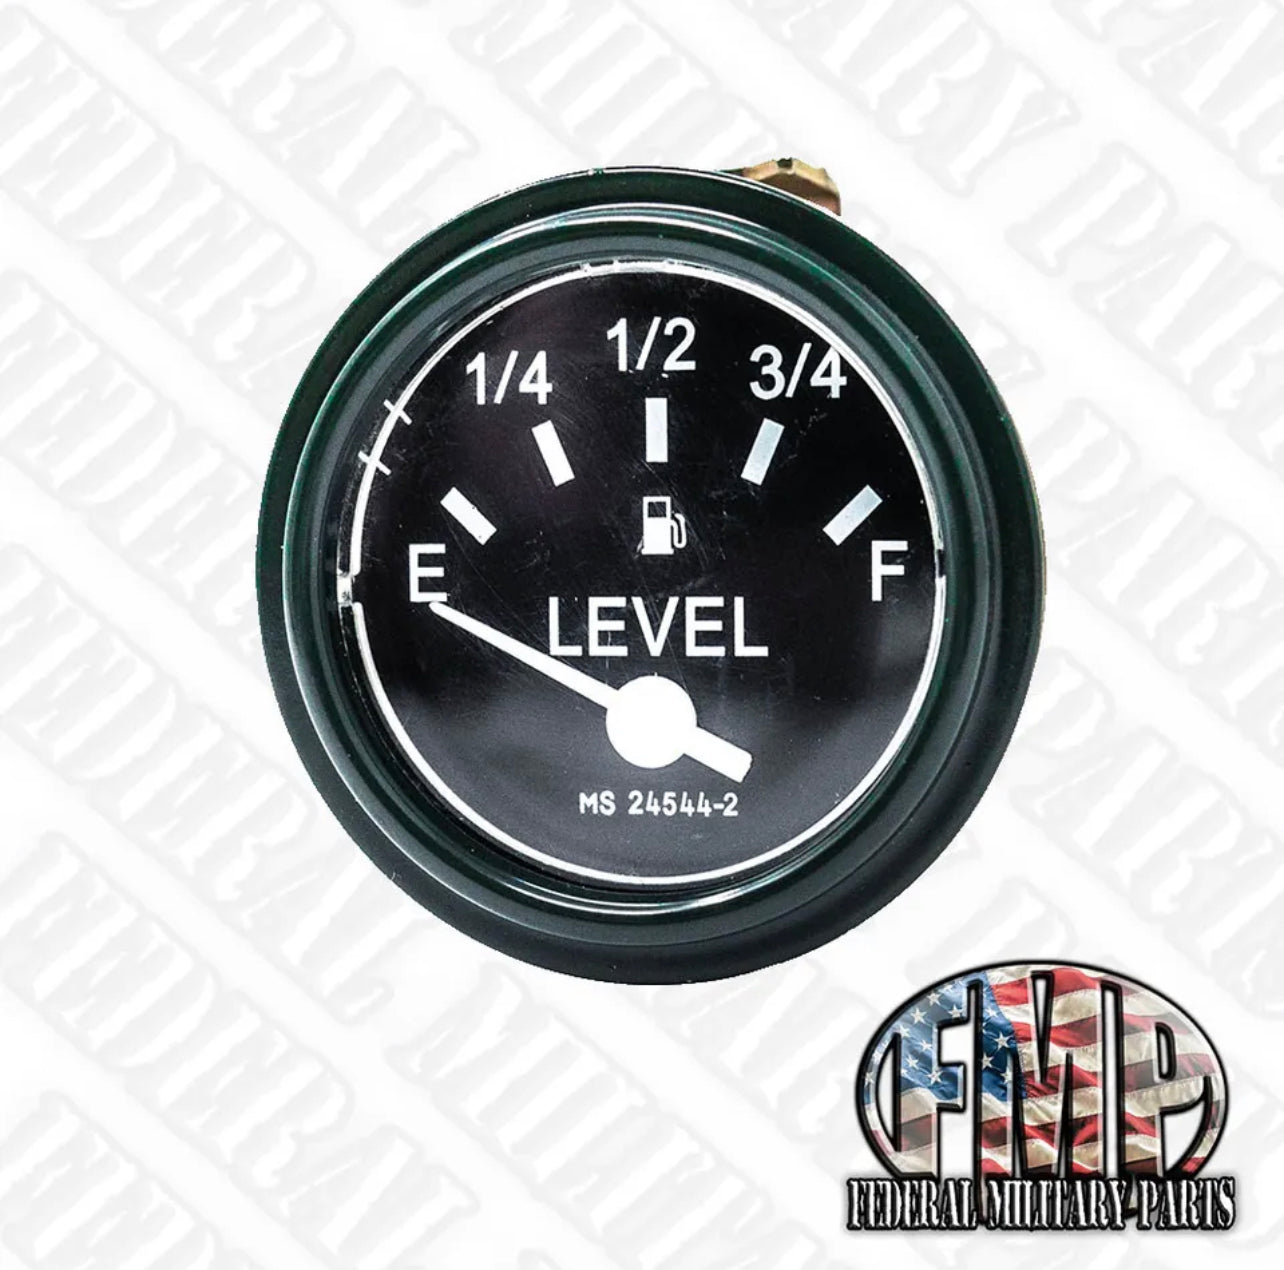 Replacement Fuel Level Gauge MS24544-2 M-Series Military Truck Humvee M35 M939